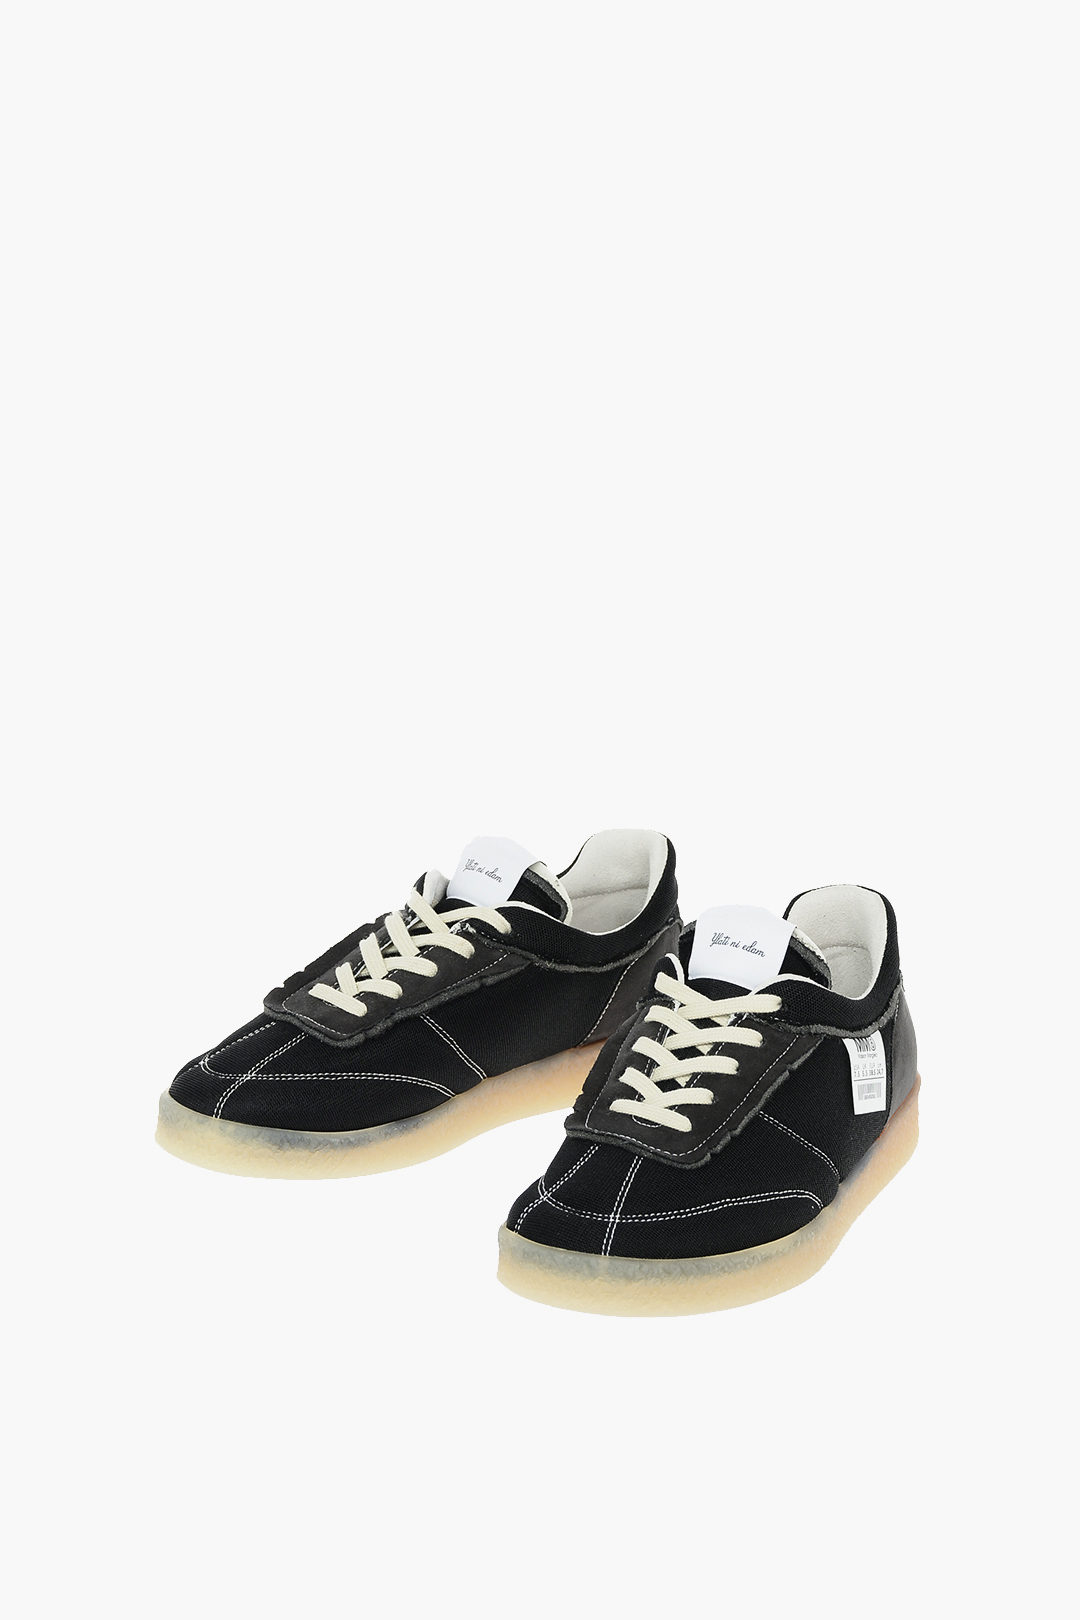 Maison Margiela MM6 Leather and Textile COURT INSIDE OUT Sneakers women ...